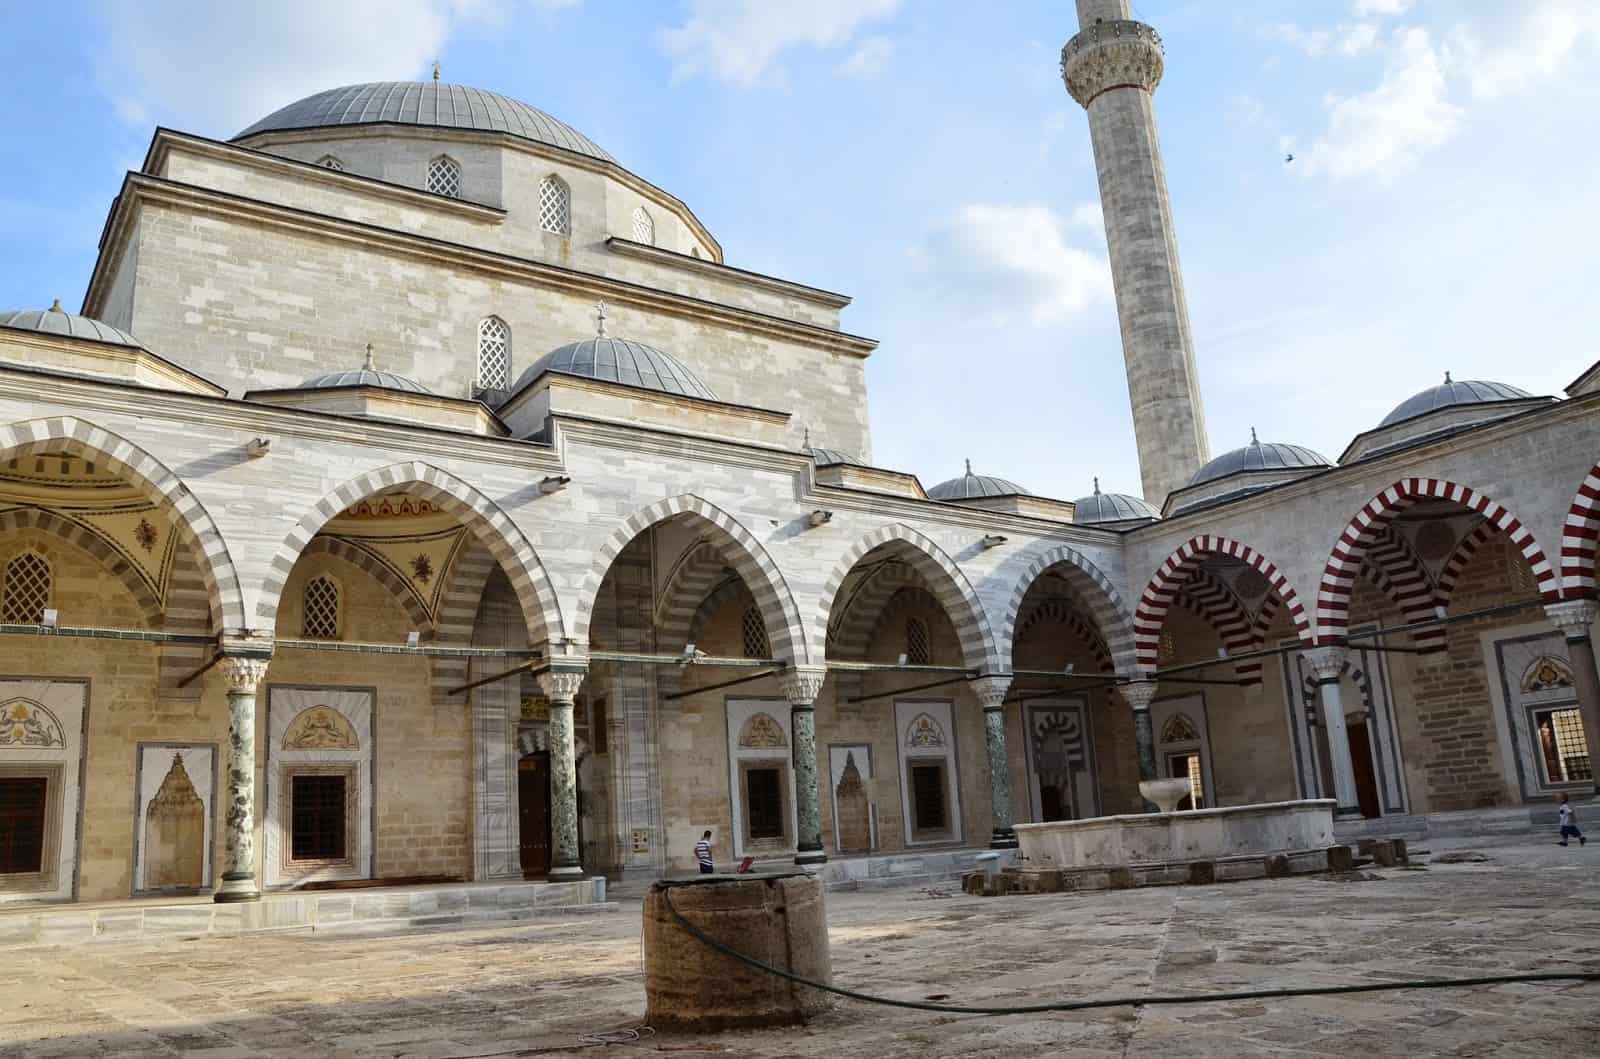 Inner courtyard at the Bayezid II Mosque at the Bayezid II Complex in Edirne, Turkey